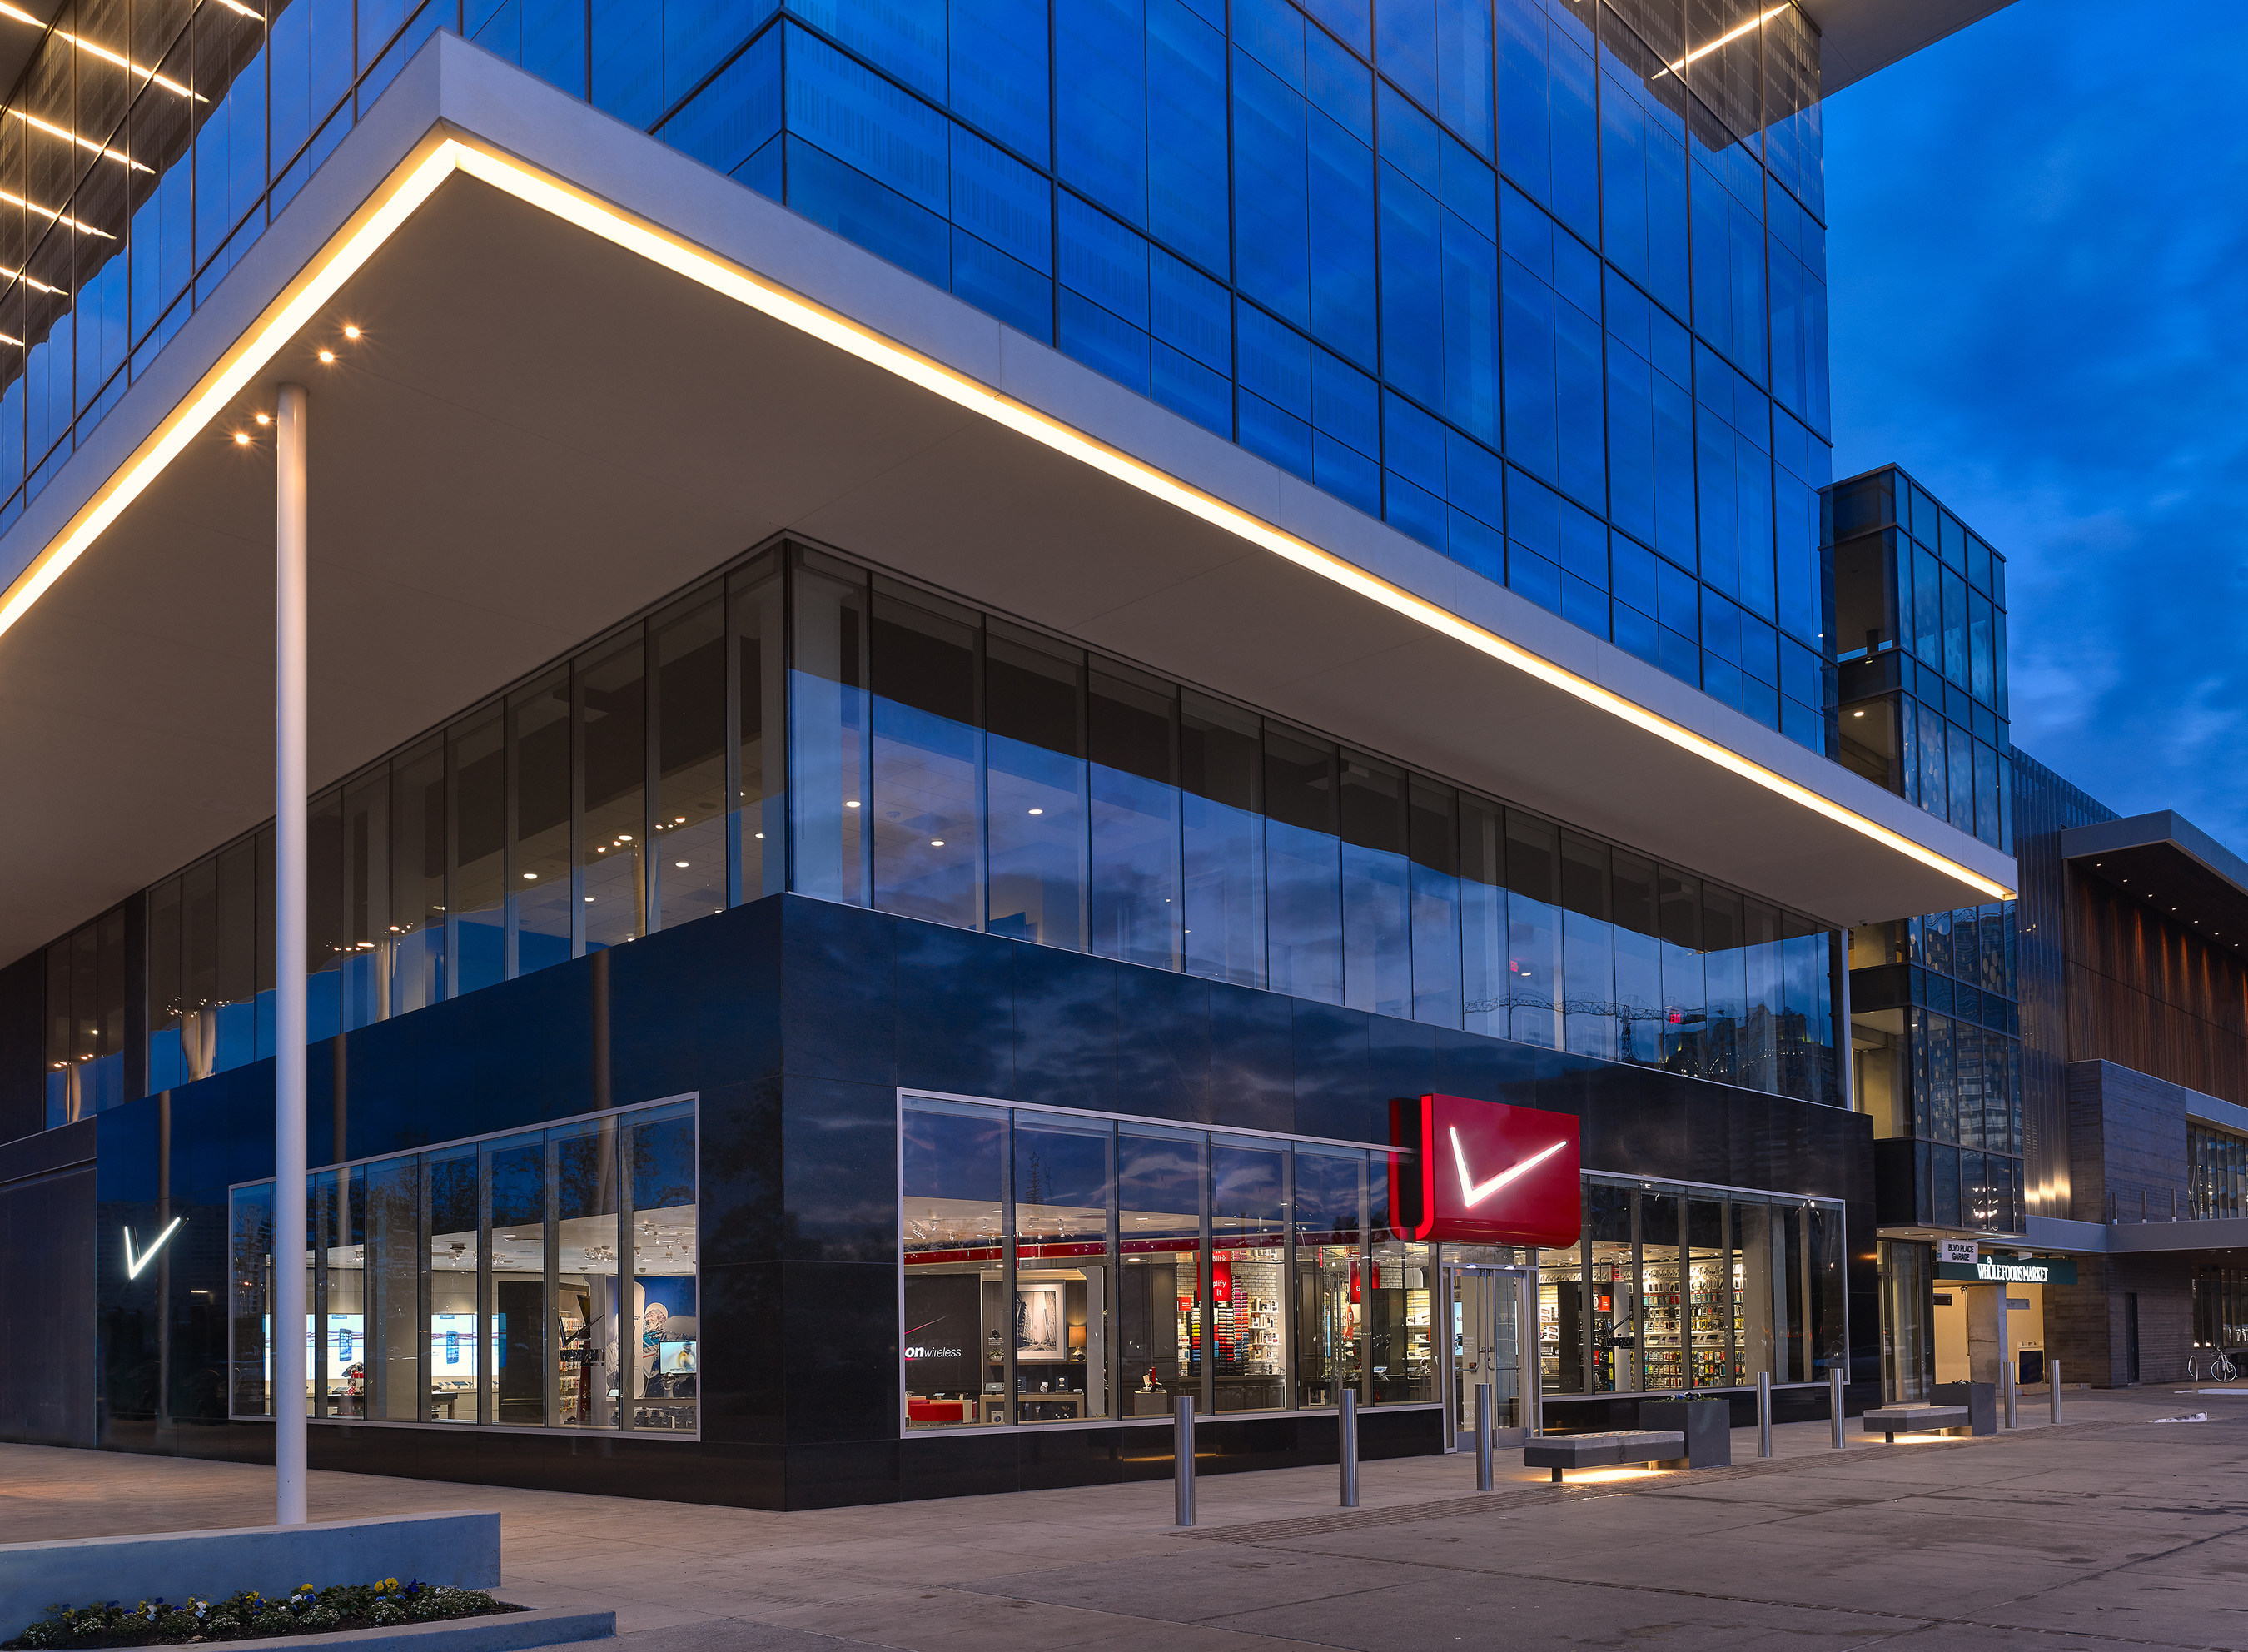 The Verizon Destination Store opened in Houston, Texas today at BLVD Place shopping center. Verizon is taking the retail experience to the next level with a new retail approach focusing on enhancing customers' mobile lifestyles. - (C) John W. Davis, ASMP, AIAP - DVDesign Group, Inc.